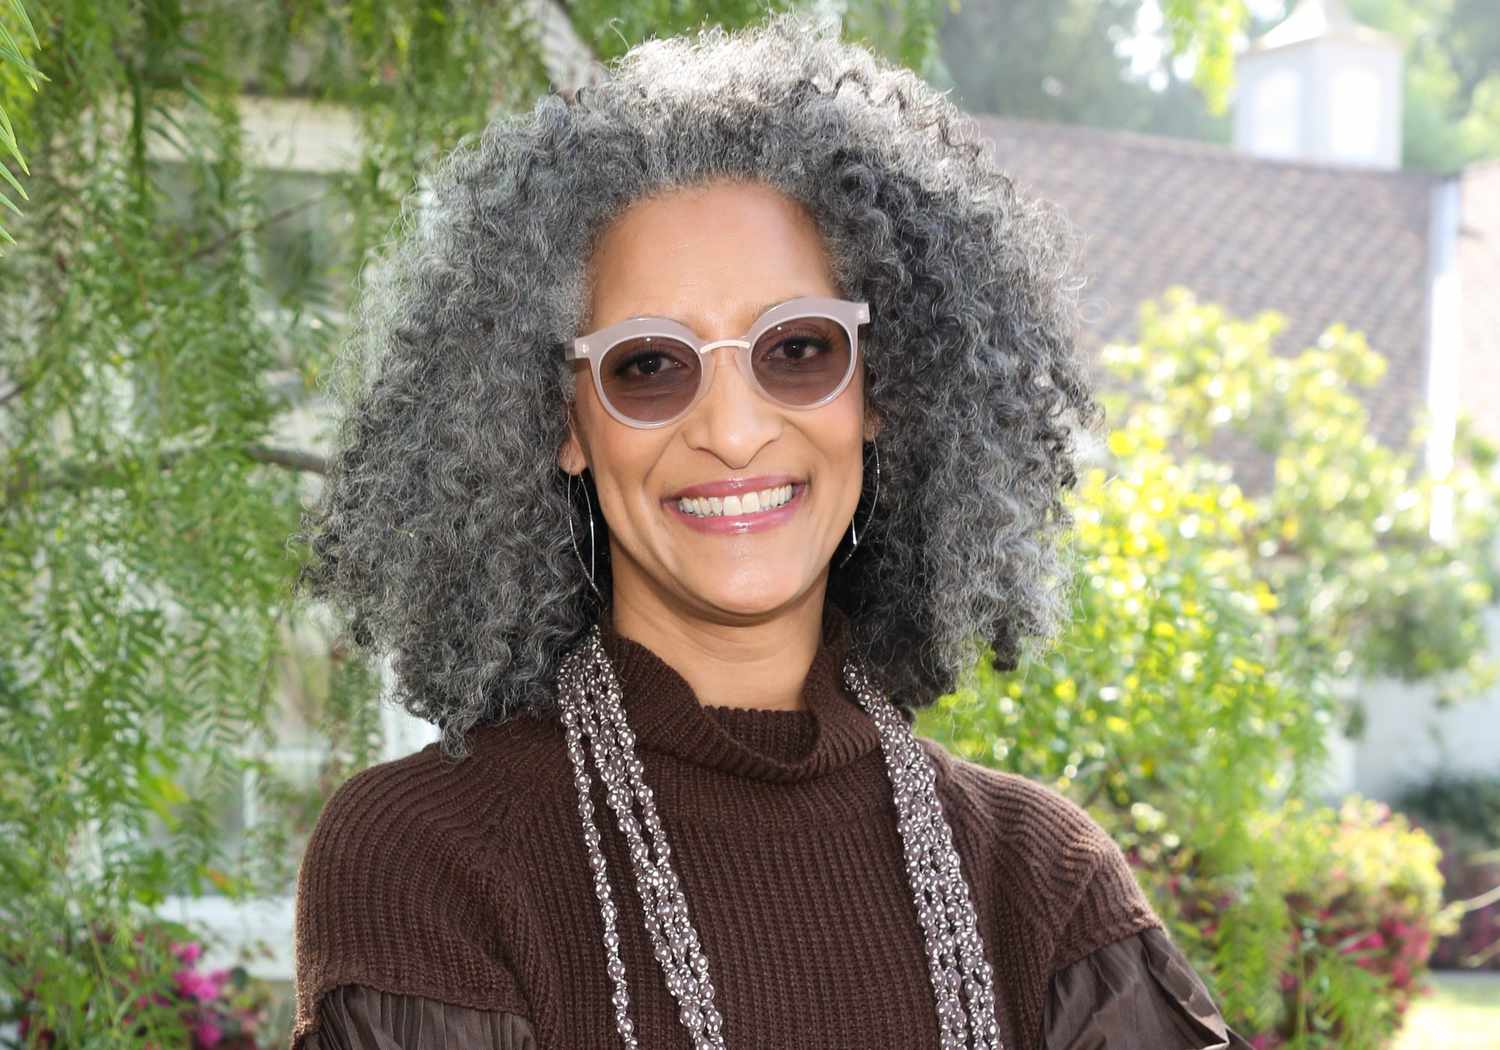 Carla Hall Embraces Aging With Humor, Rejecting Botox for an Easy-peasy Lifestyle